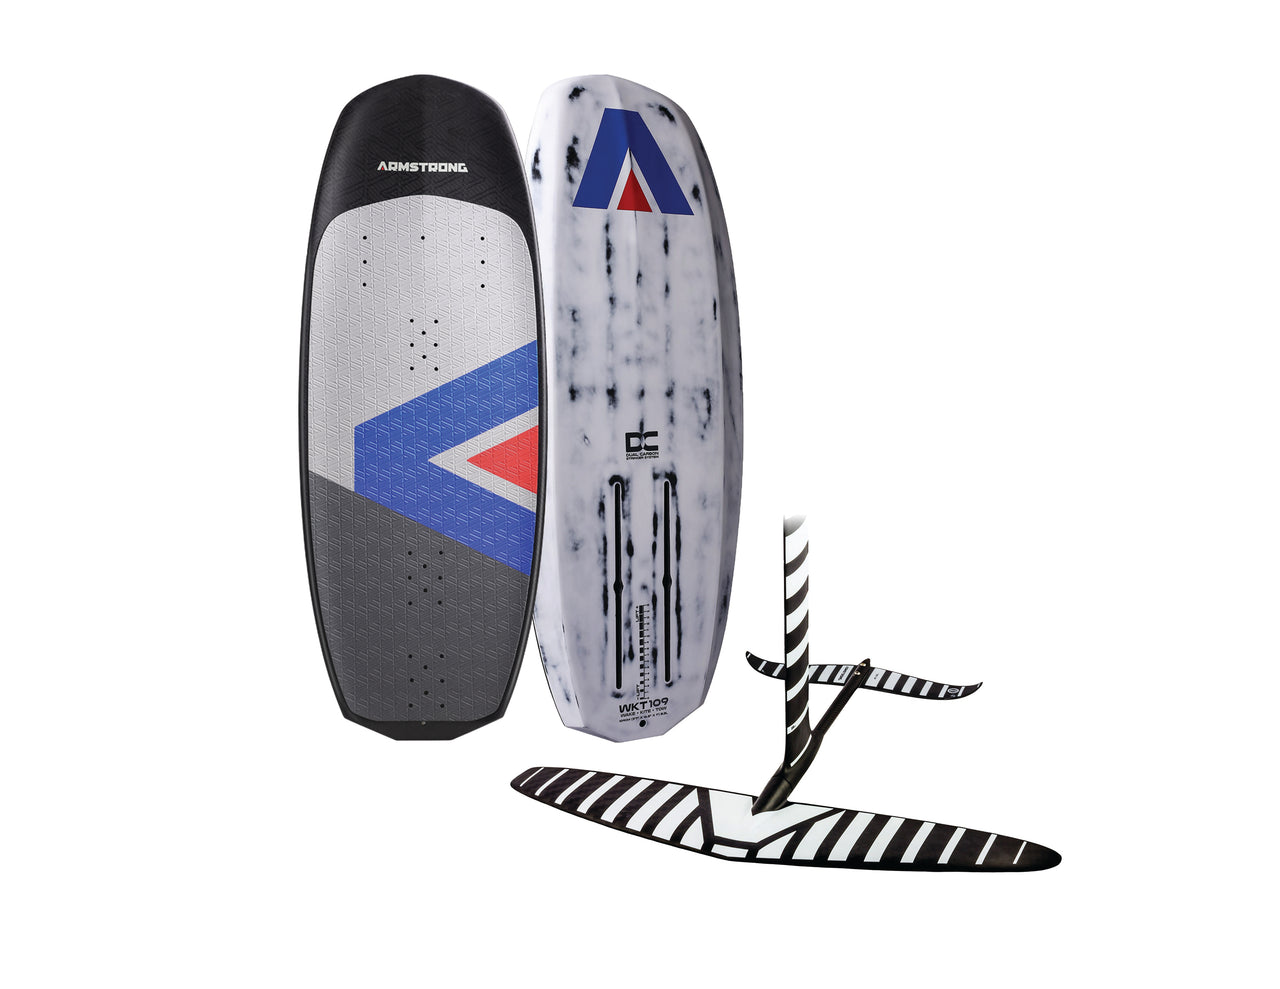 Armstrong Wakefoil Board W/ Armstrong HS1250 Foil Kit Package